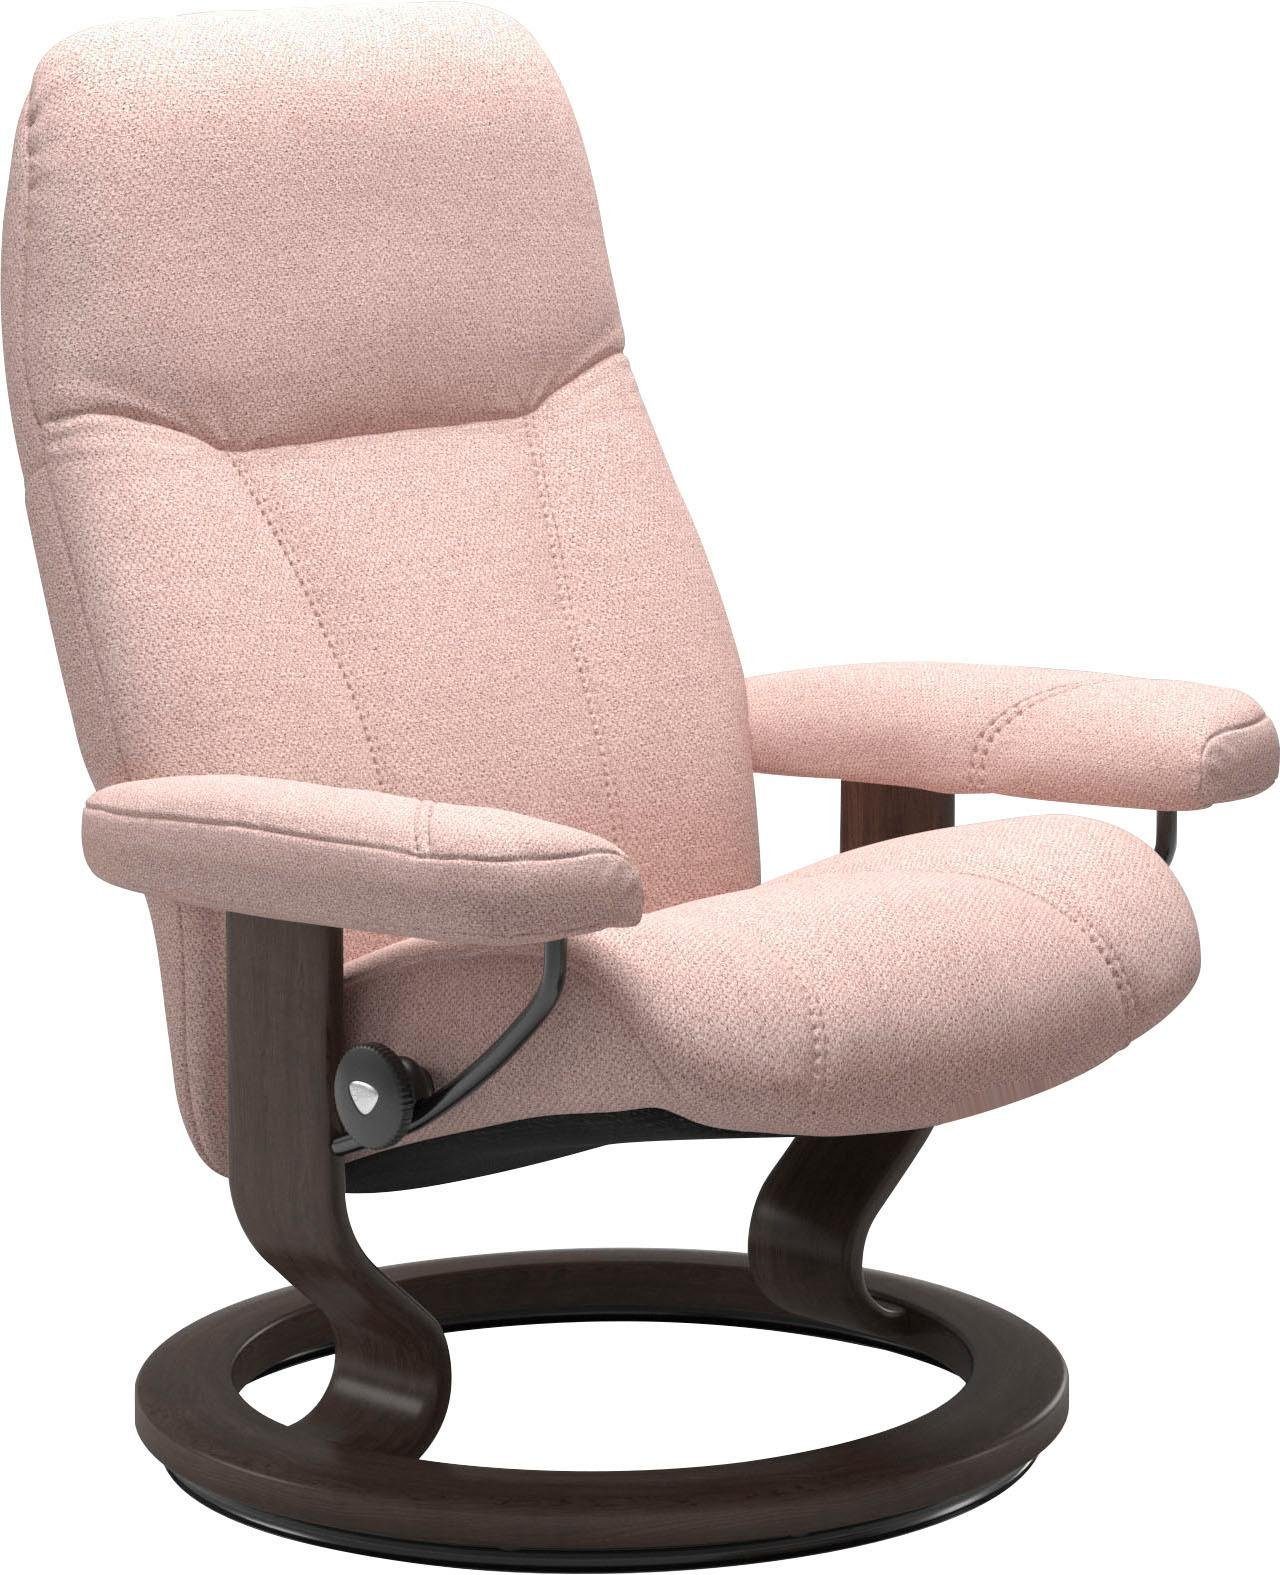 Stressless® Relaxsessel Consul, mit Classic Base, Größe M, Gestell Wenge | Funktionssessel